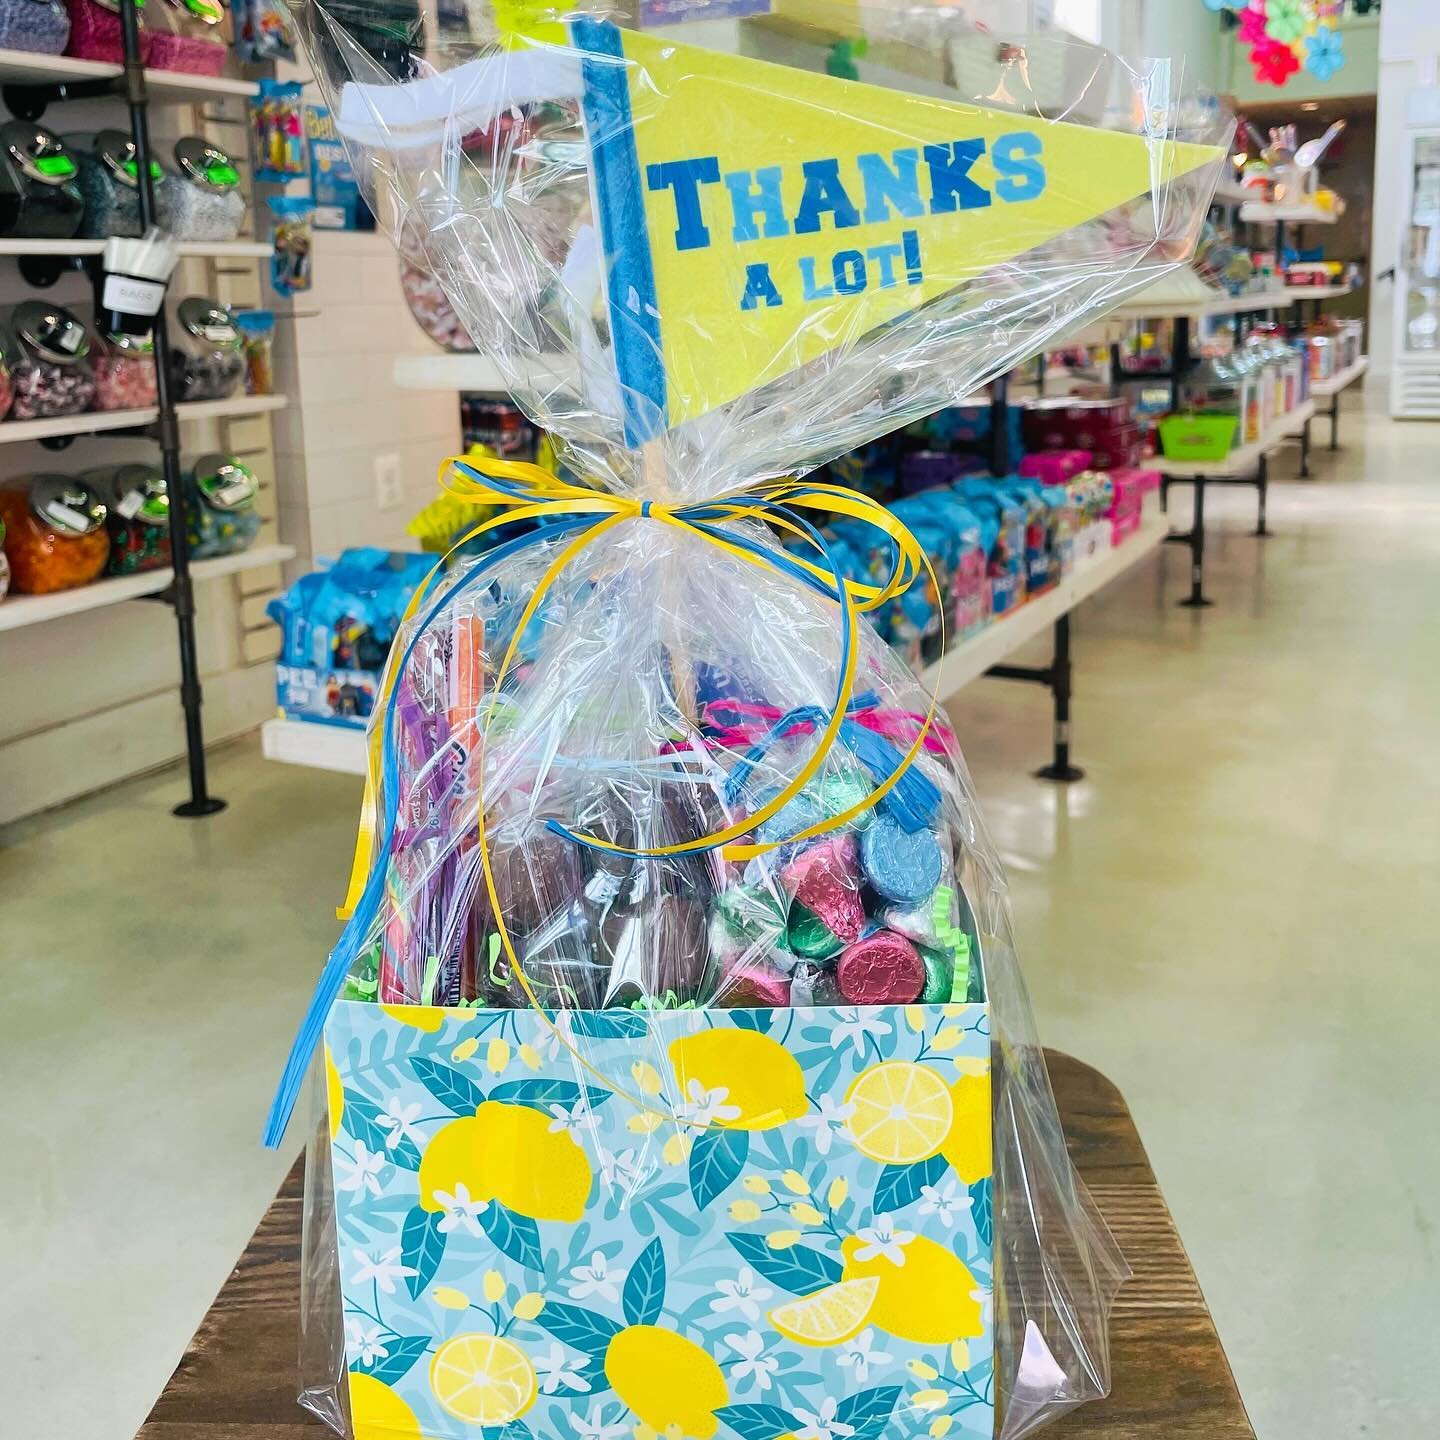 Teacher Appreciation Week begins Monday, and we&rsquo;ve got the treats to make their week extra sweet! Stop by this weekend and put together a gift basket that&rsquo;s worthy of an A+ ✏️🚌🍎
.
.
.
#henryssweetretreat #itsoktocrave #teacherappreciati